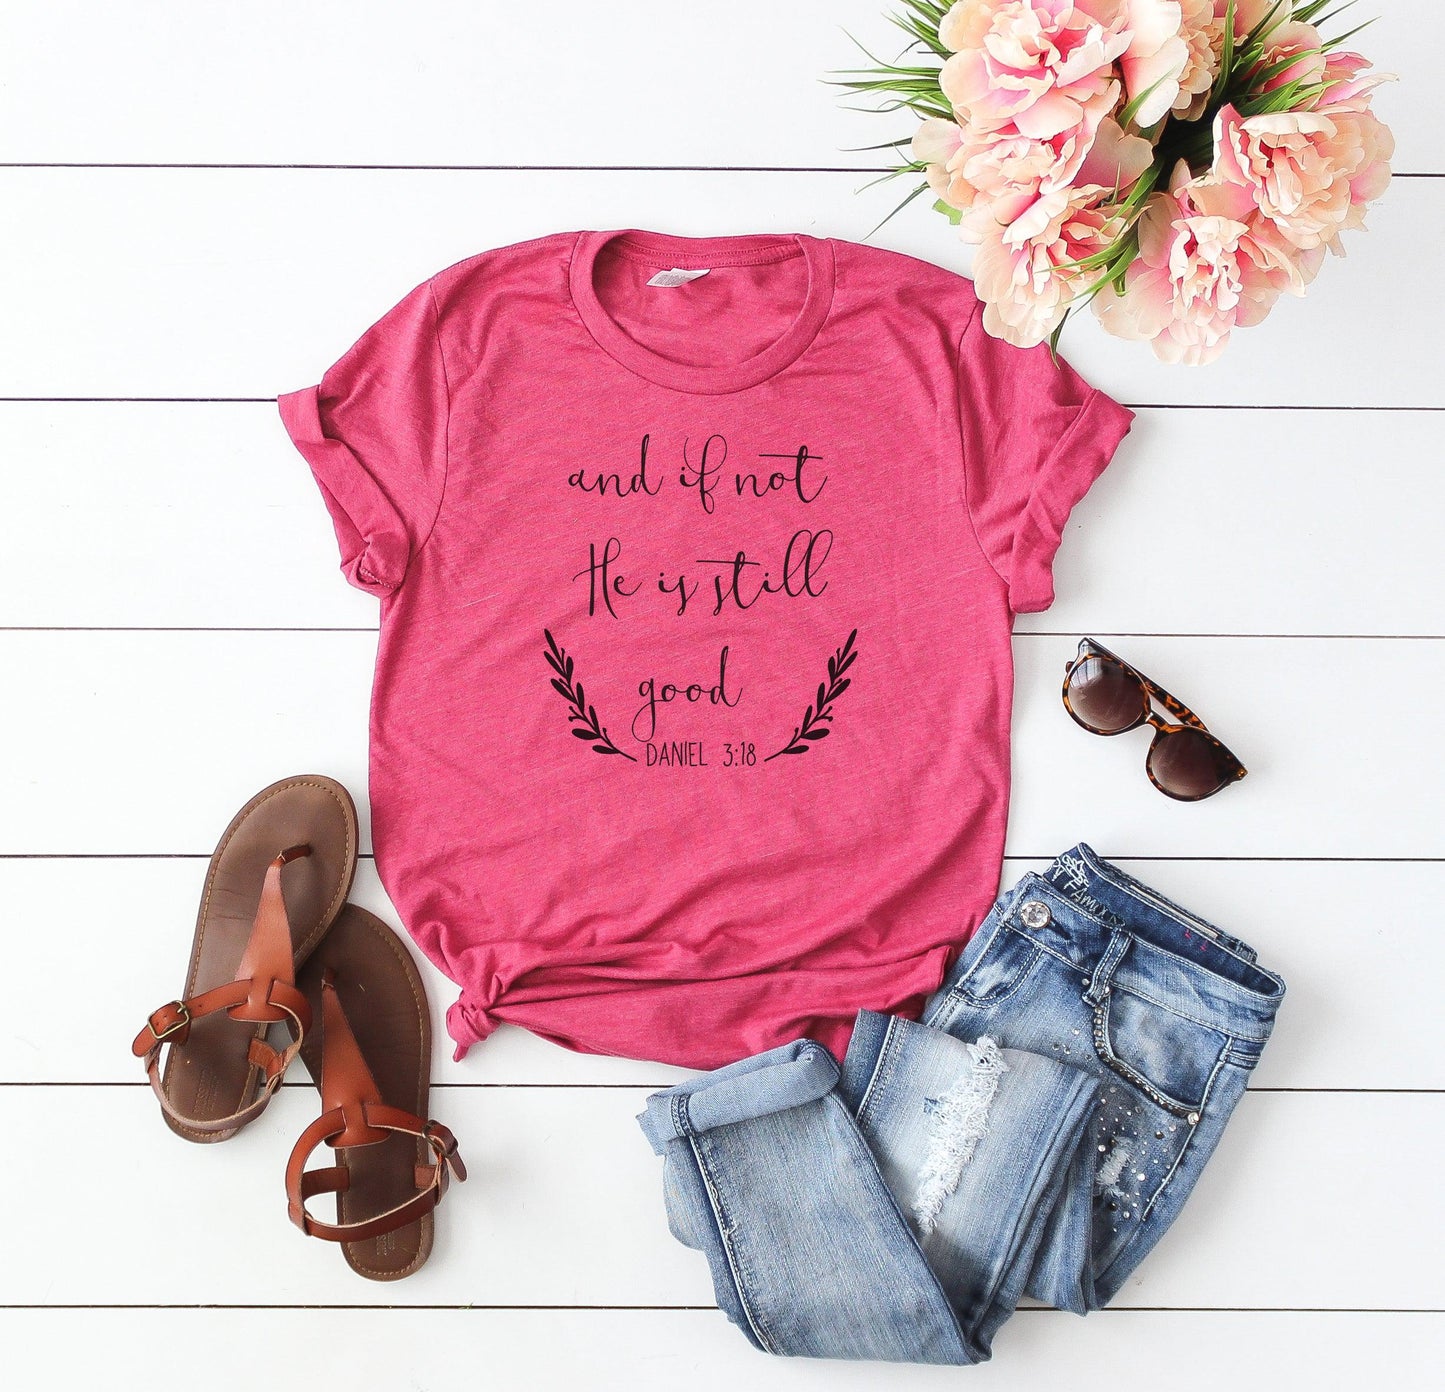 And If Not, He Is Still Good Shirt